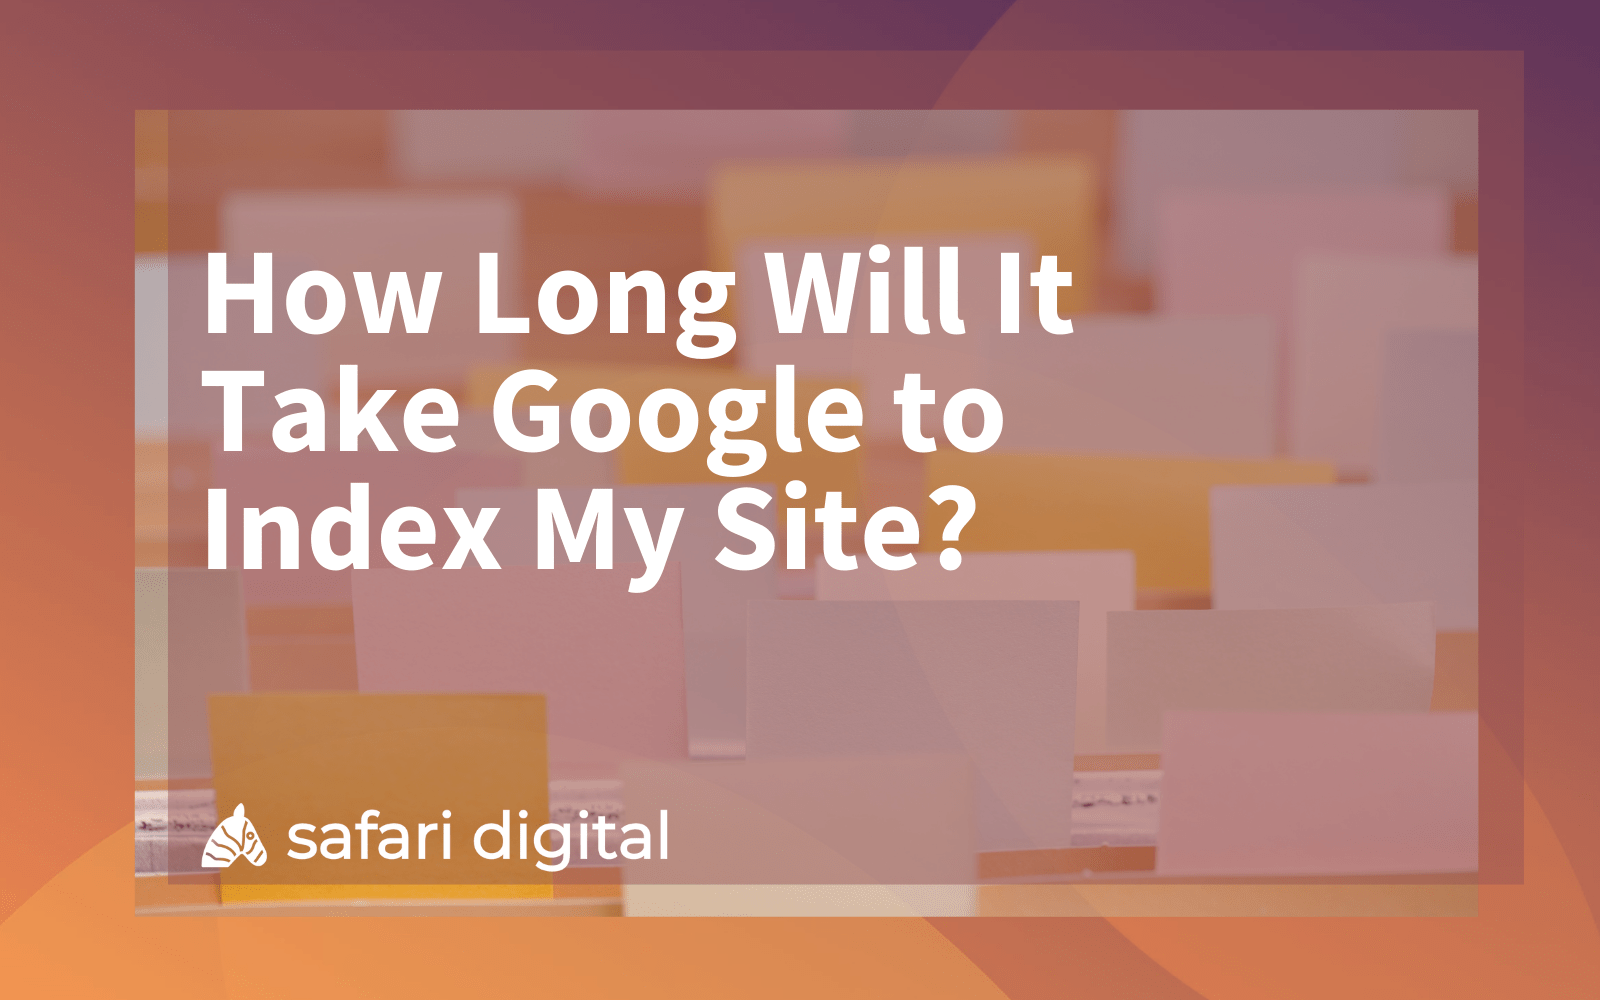 How Long Will It Take Google to Index My Site?